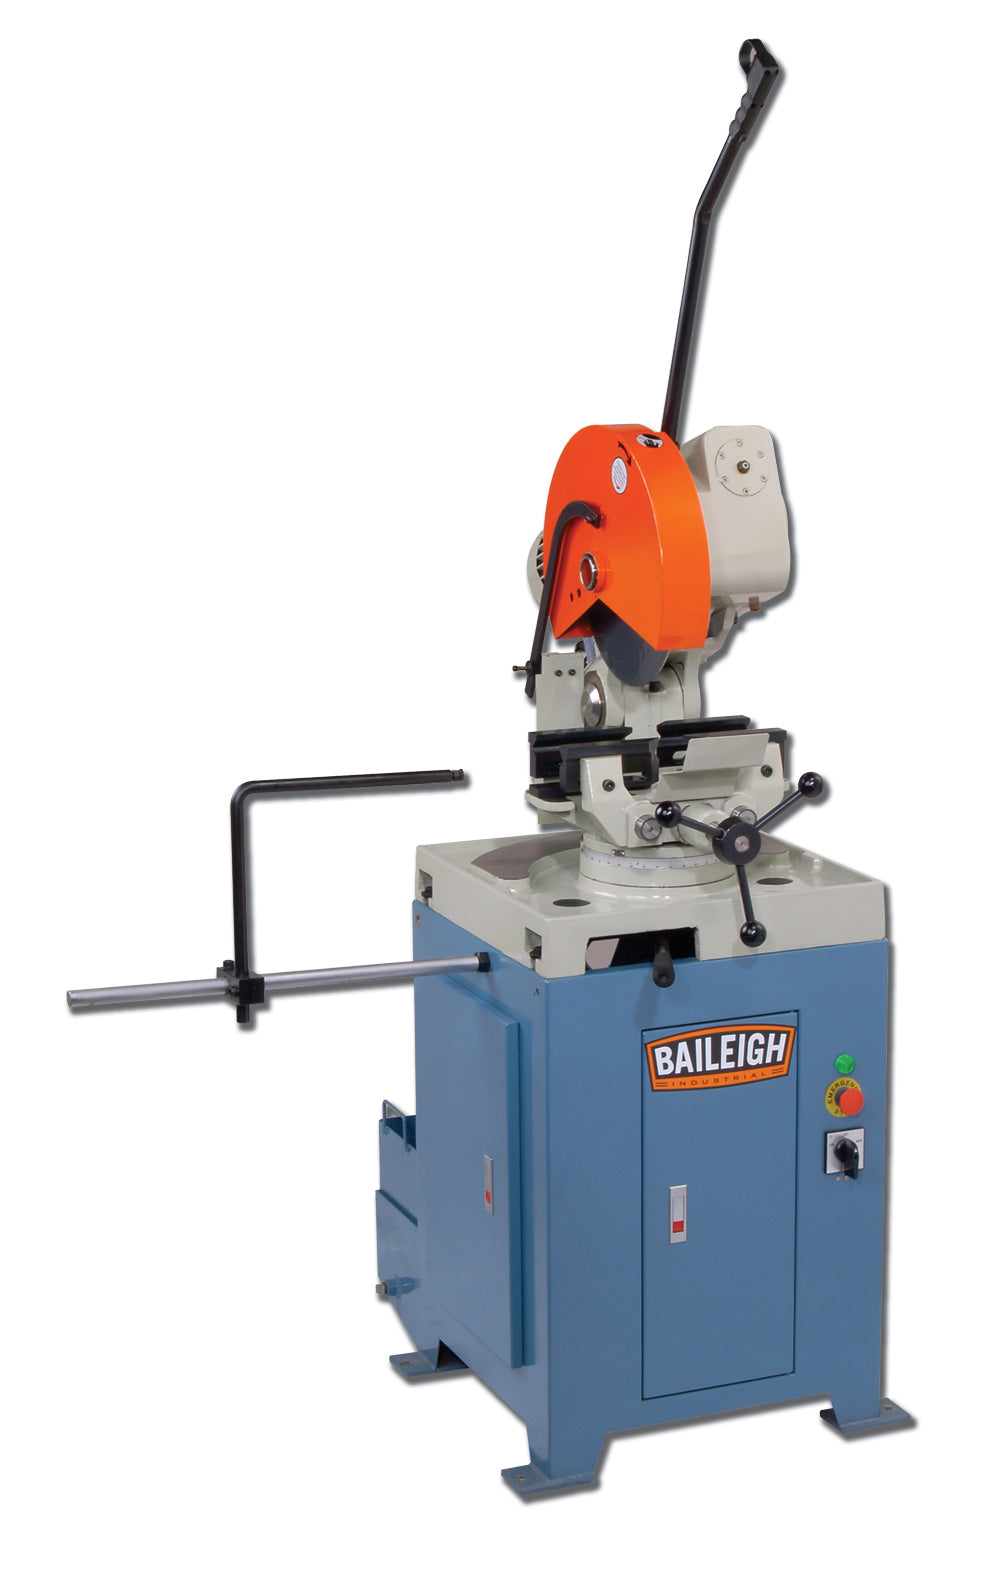 Baileigh CS-350M 220V 3 Phase Heavy Duty Manually Operated Cold Saw 14" Blade Diameter